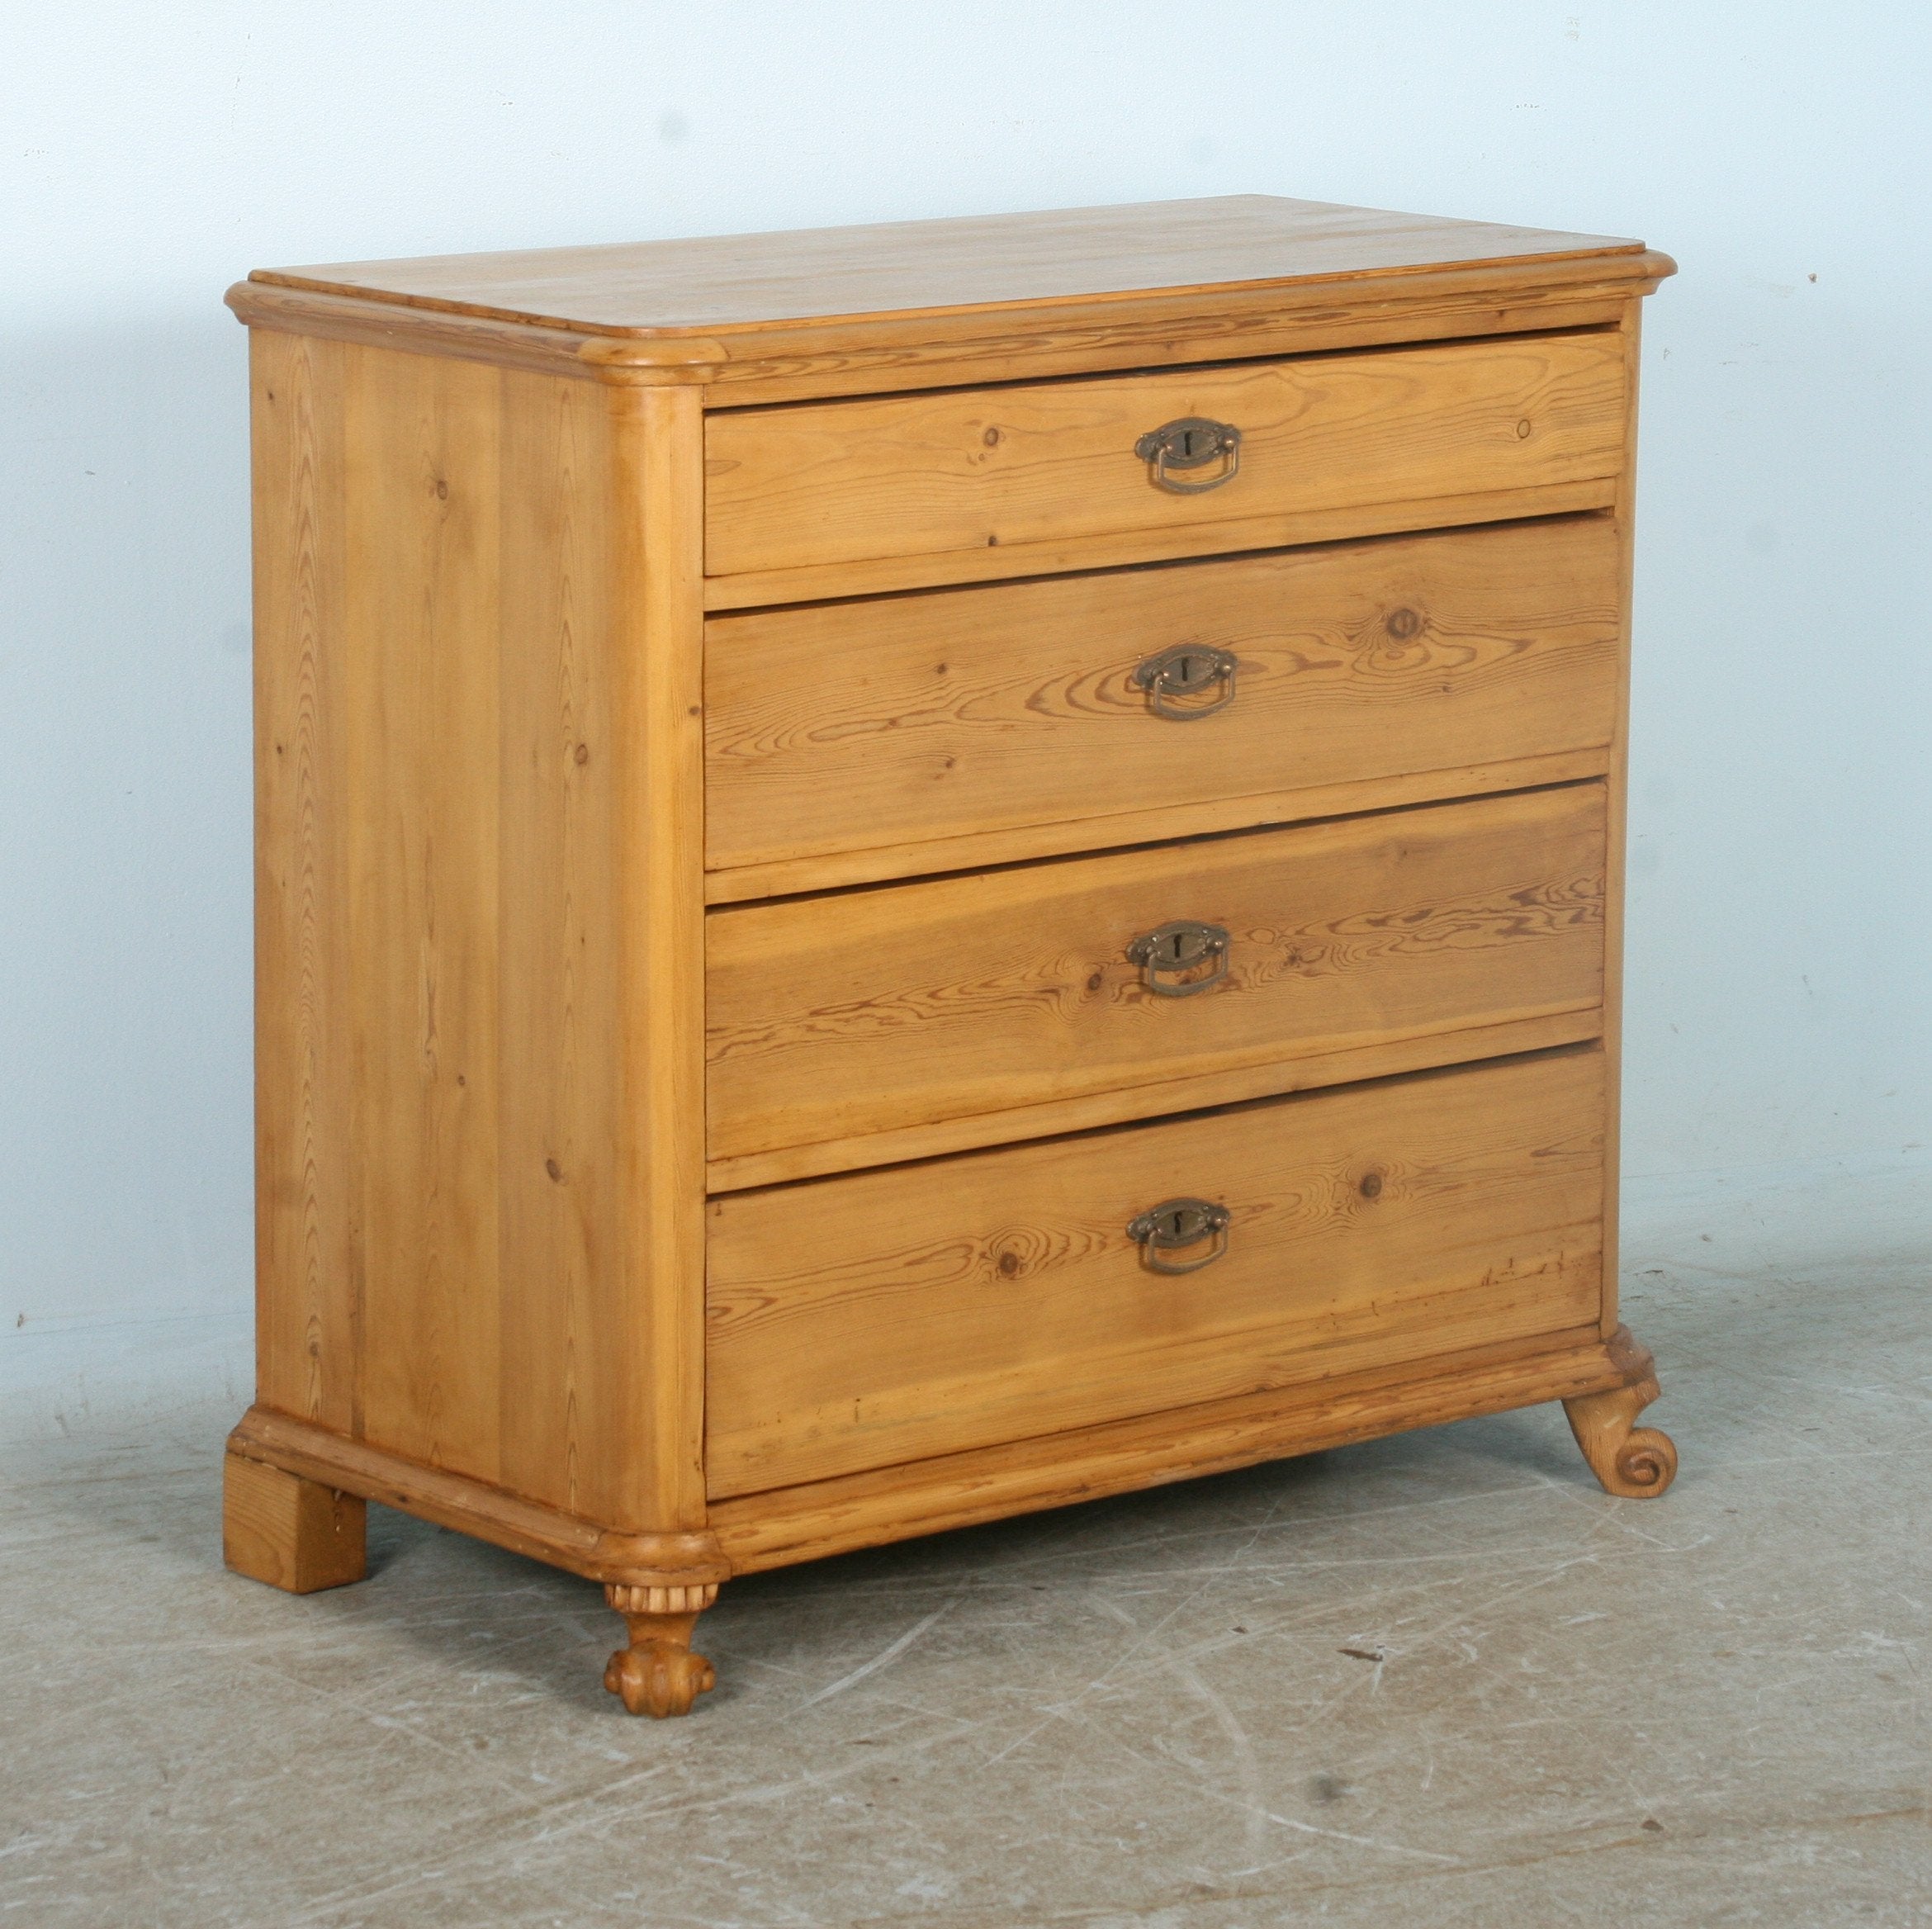 Antique Pine Chest of Drawers with Carved Feet, circa 1880